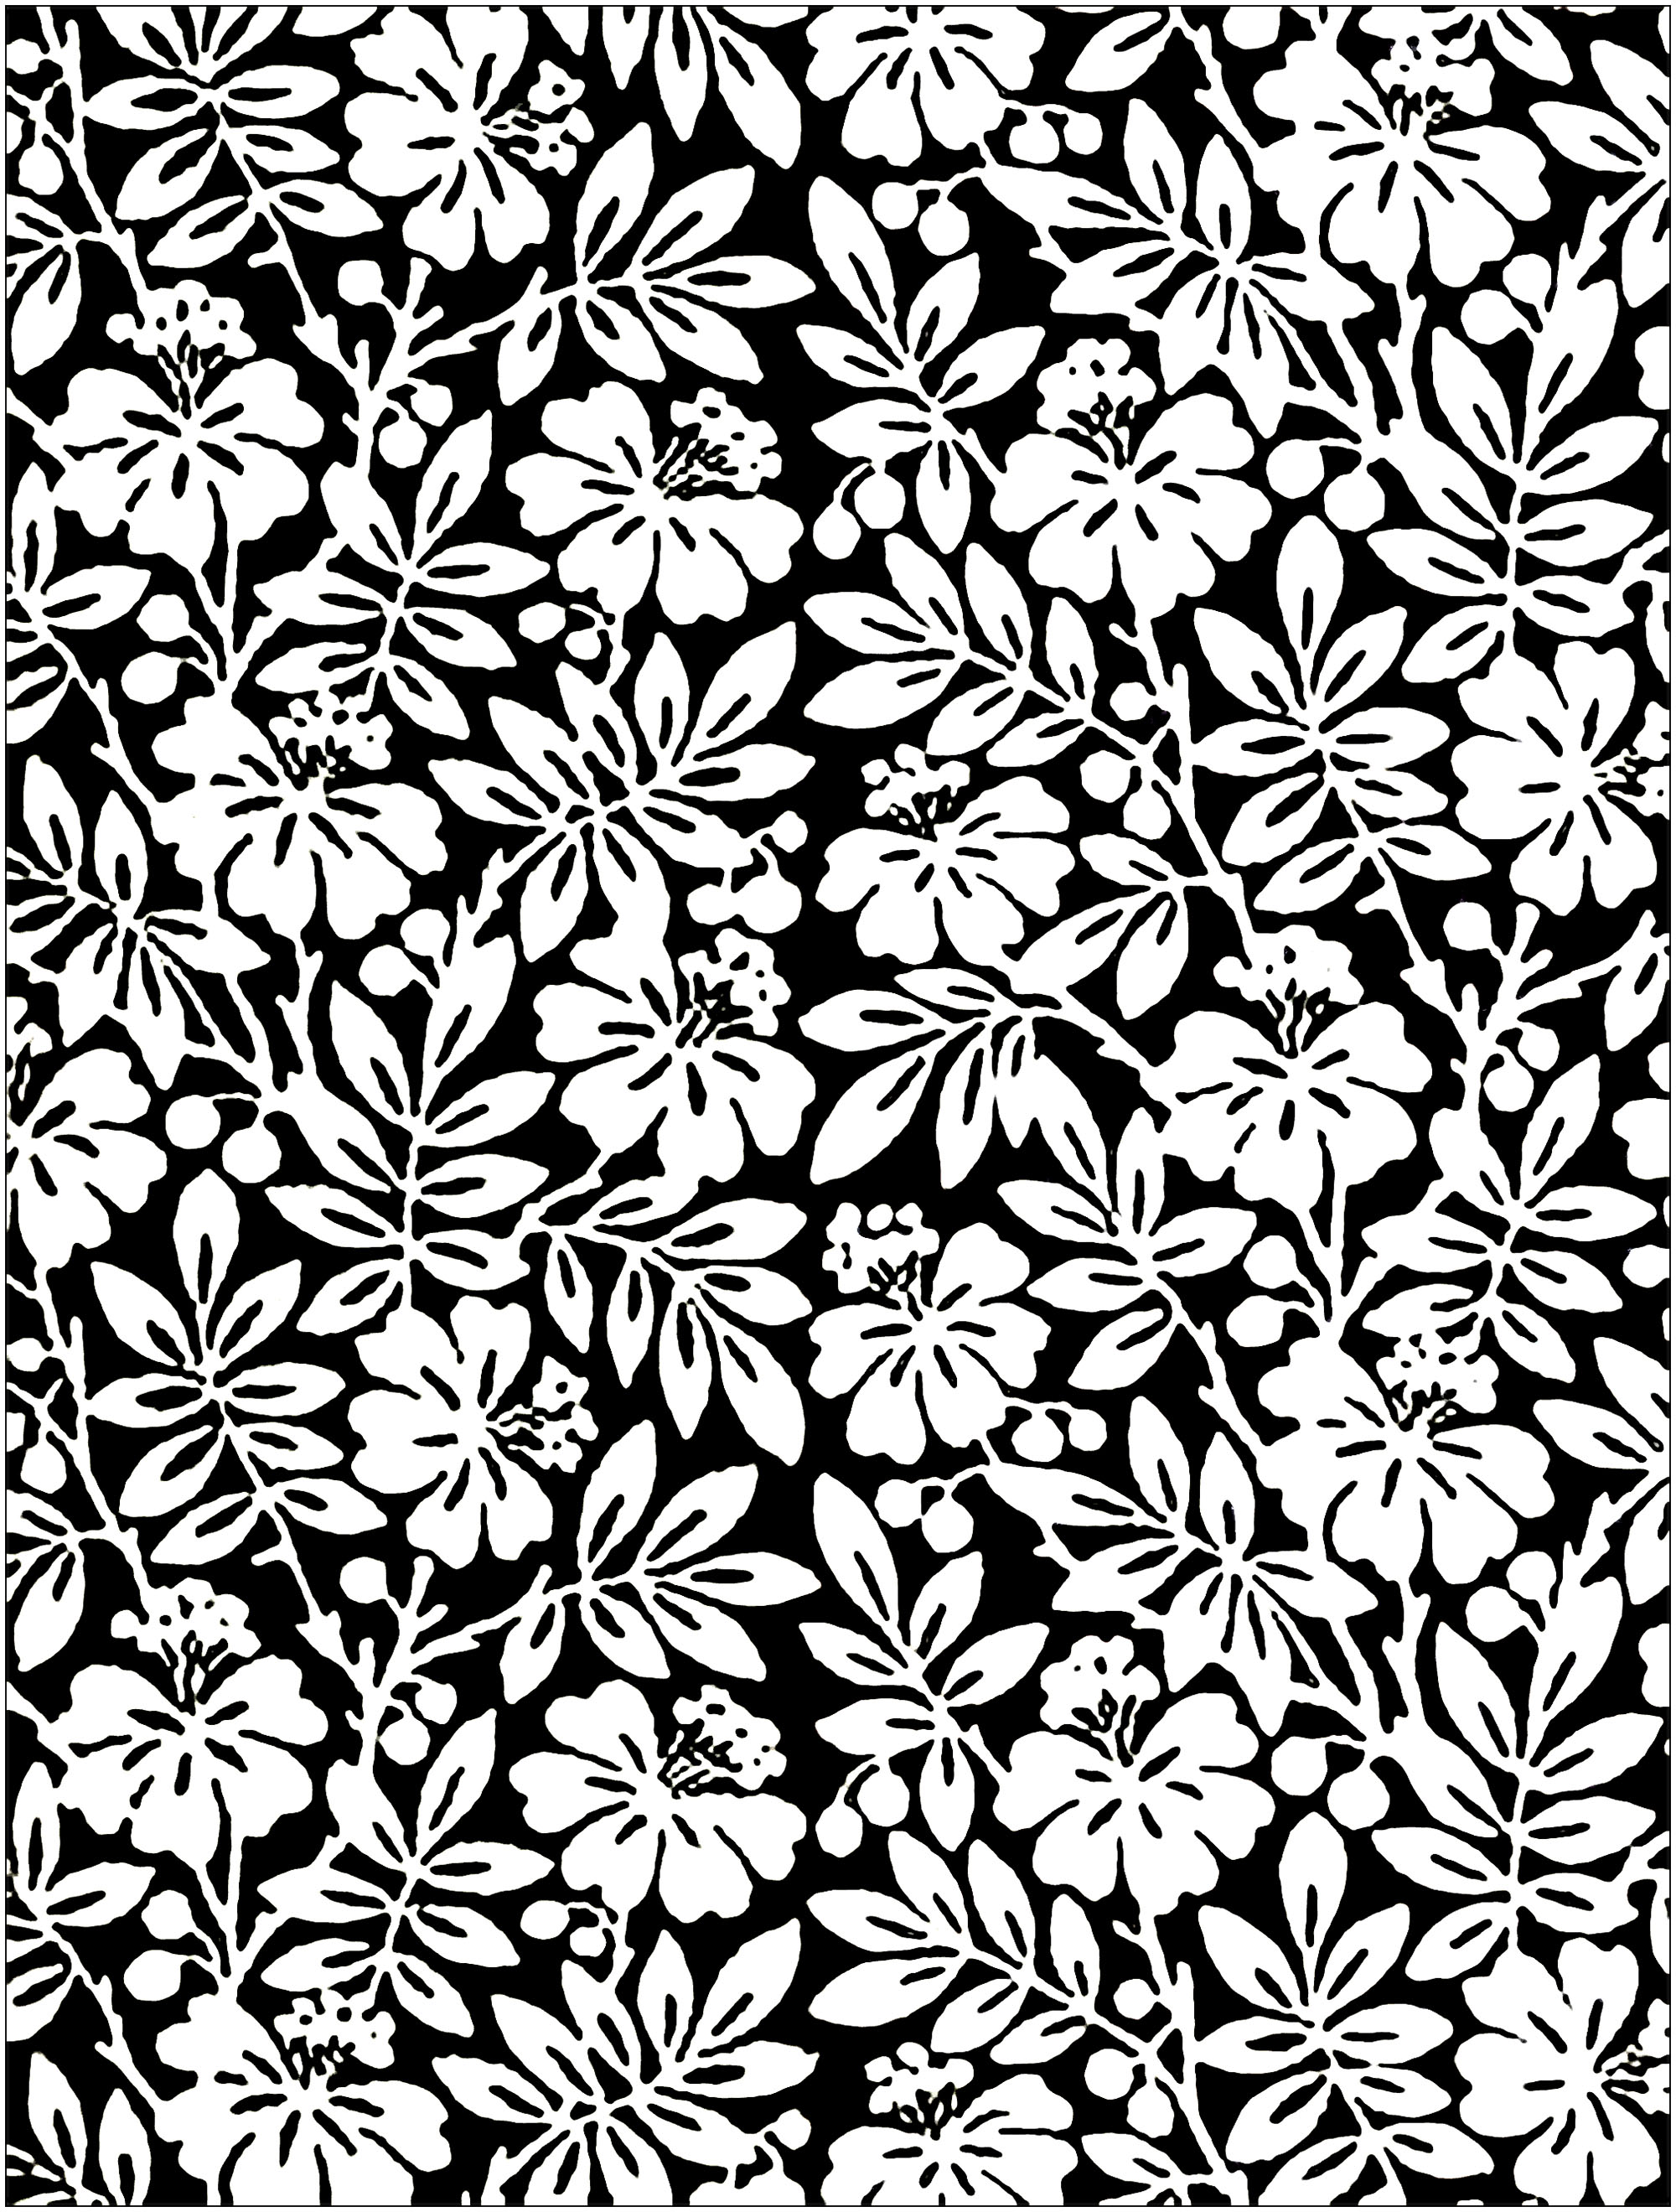 Coloring page with flowers on black background, created from an English wallpaper (19th century), Artist : Art. Isabelle